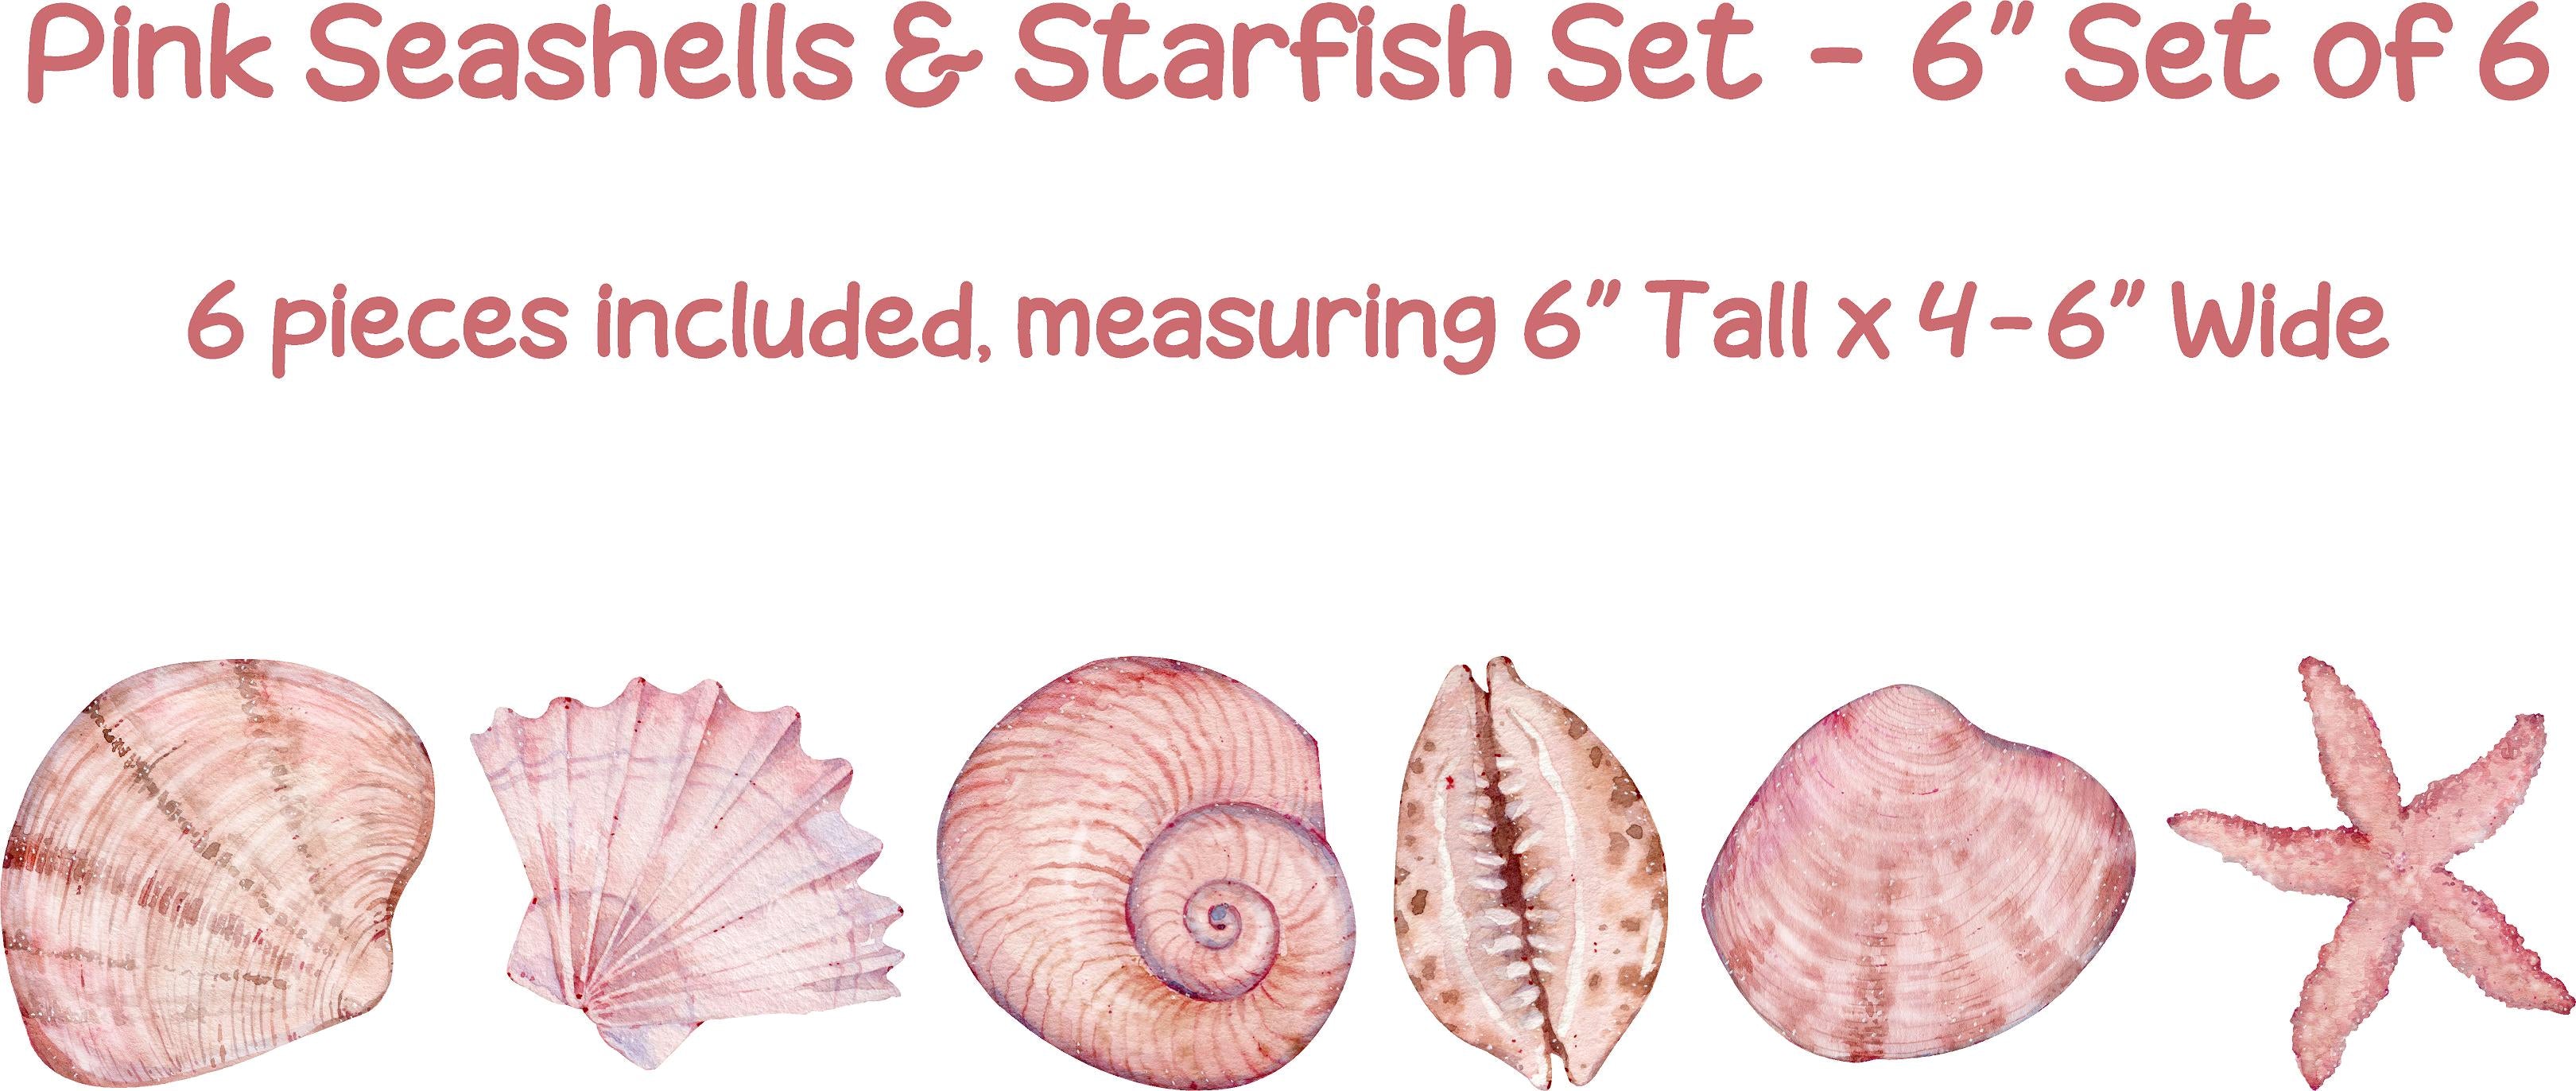 Pink Seashells & Starfish Wall Decal Set of 6 Ocean Sea Life Removable Fabric Wall Sticker | DecalBaby